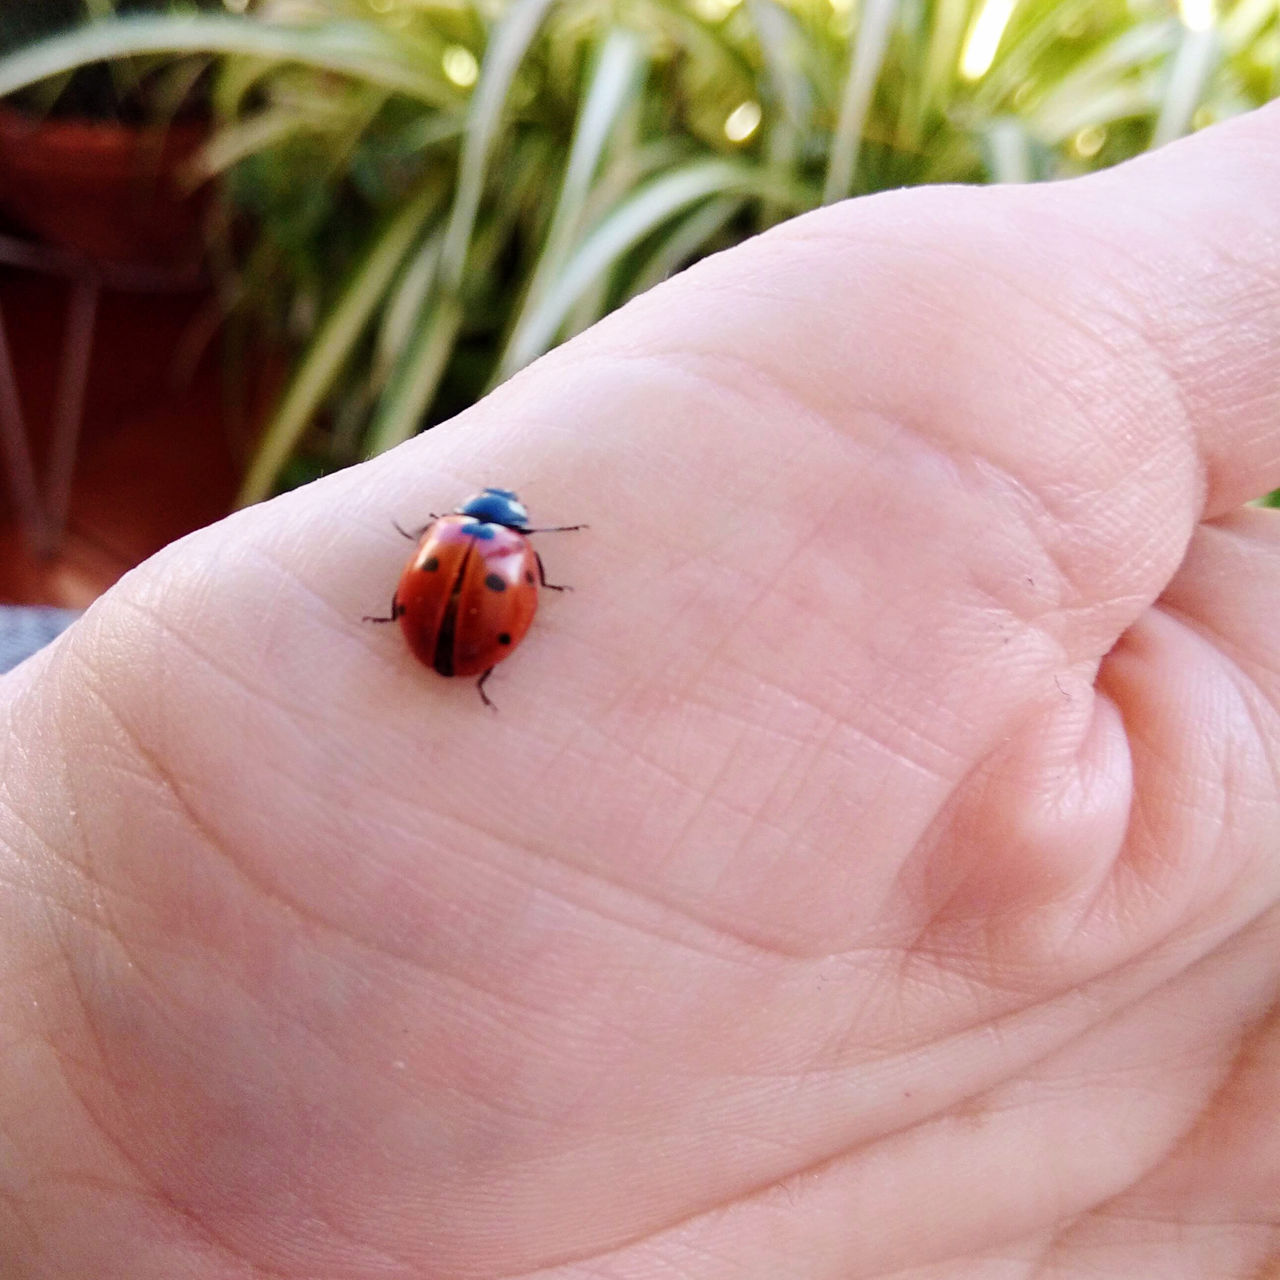 ladybug, animal, hand, animal themes, insect, animal wildlife, one animal, beetle, wildlife, one person, close-up, finger, lap dog, focus on foreground, day, nature, red, macro photography, holding, outdoors